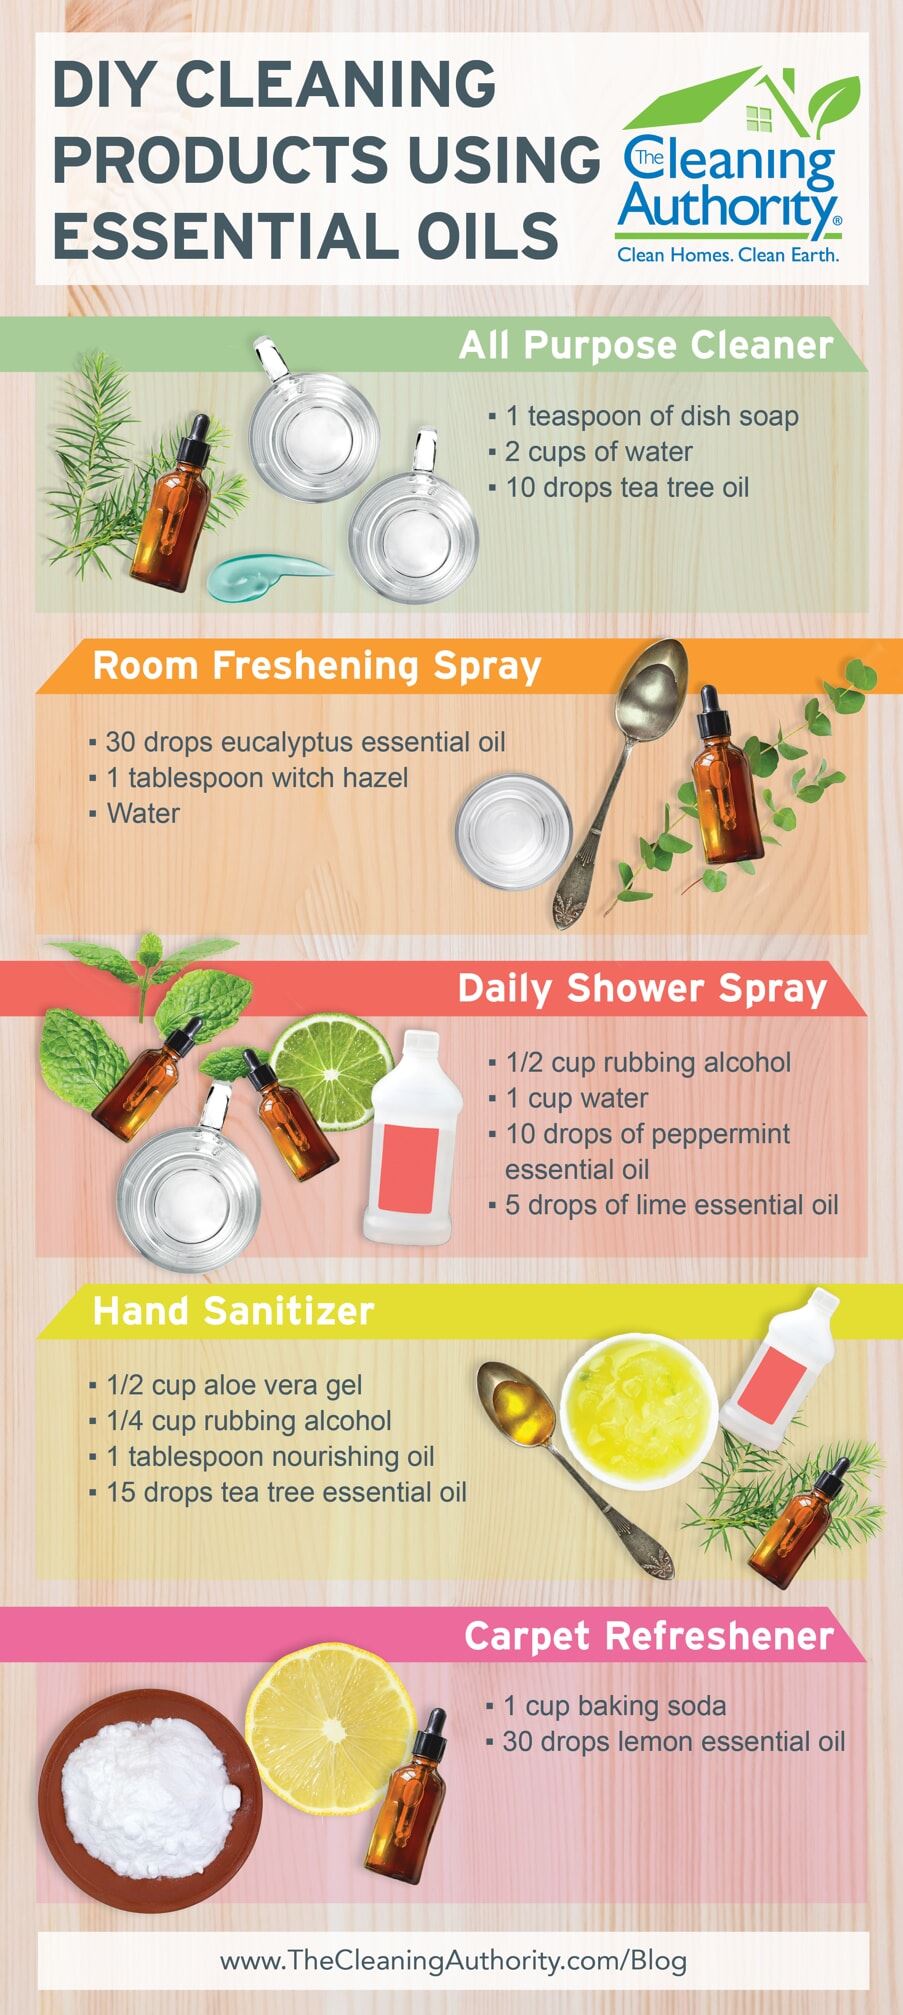 DIY cleaning products with essential oils